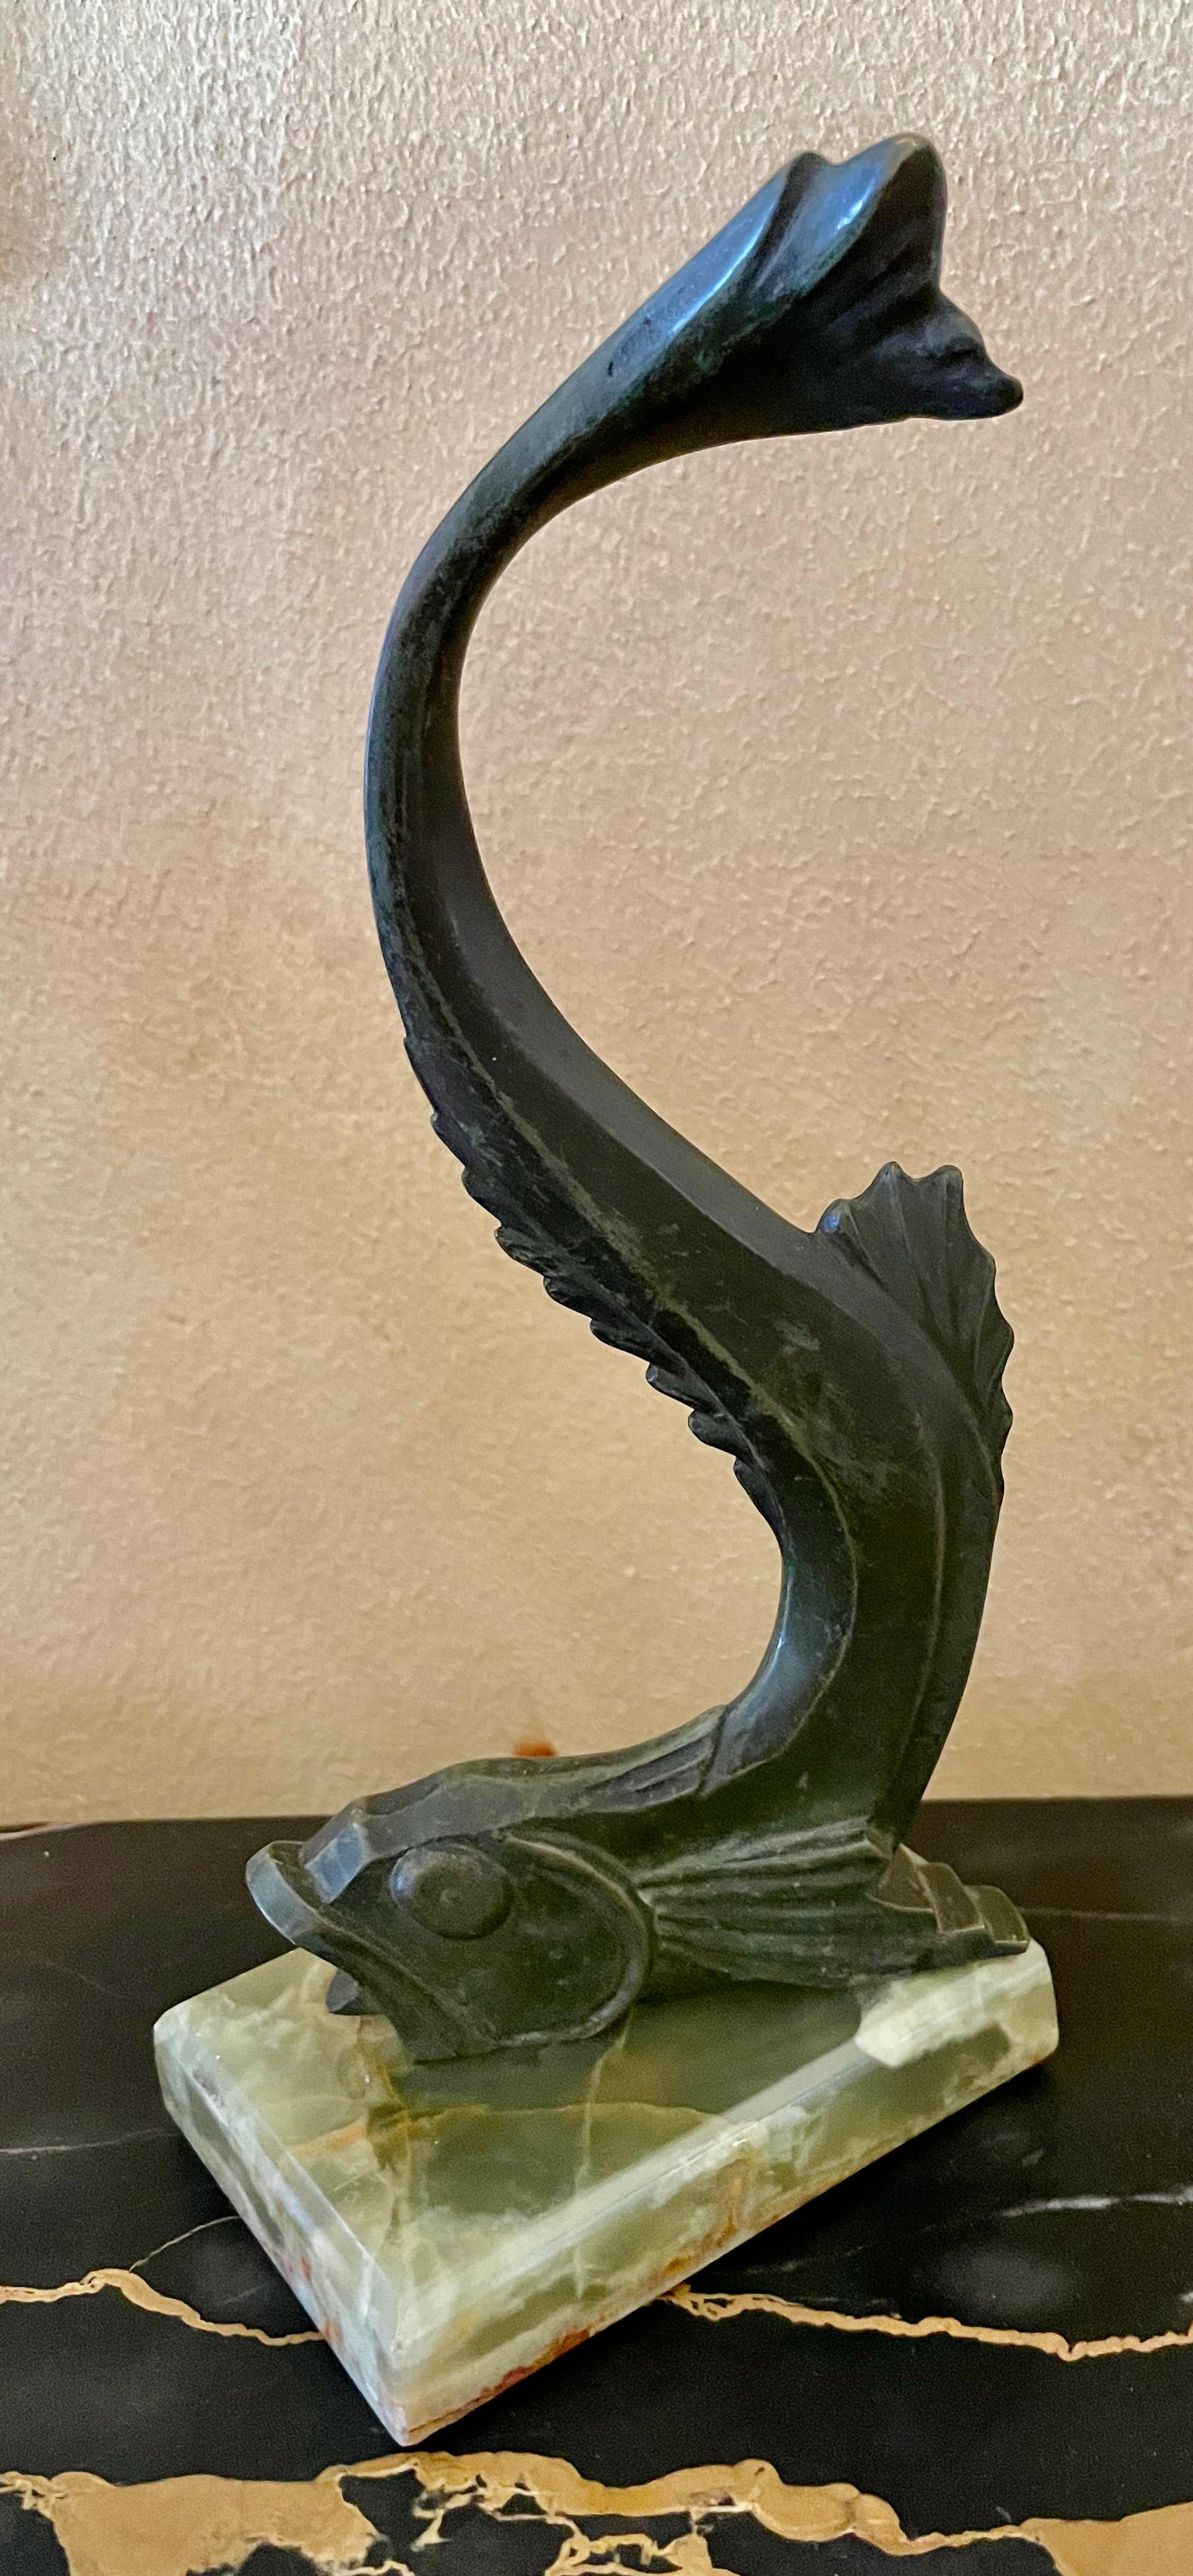 Bronze cubist fish figurine, circa 1920, finished in original verdigris patinated bronze. Signed on the sides of both edges edge, E.M. Sandoz also with “S. Freres” signature as well and mounted on a green marble base. Sandoz with his deep body of